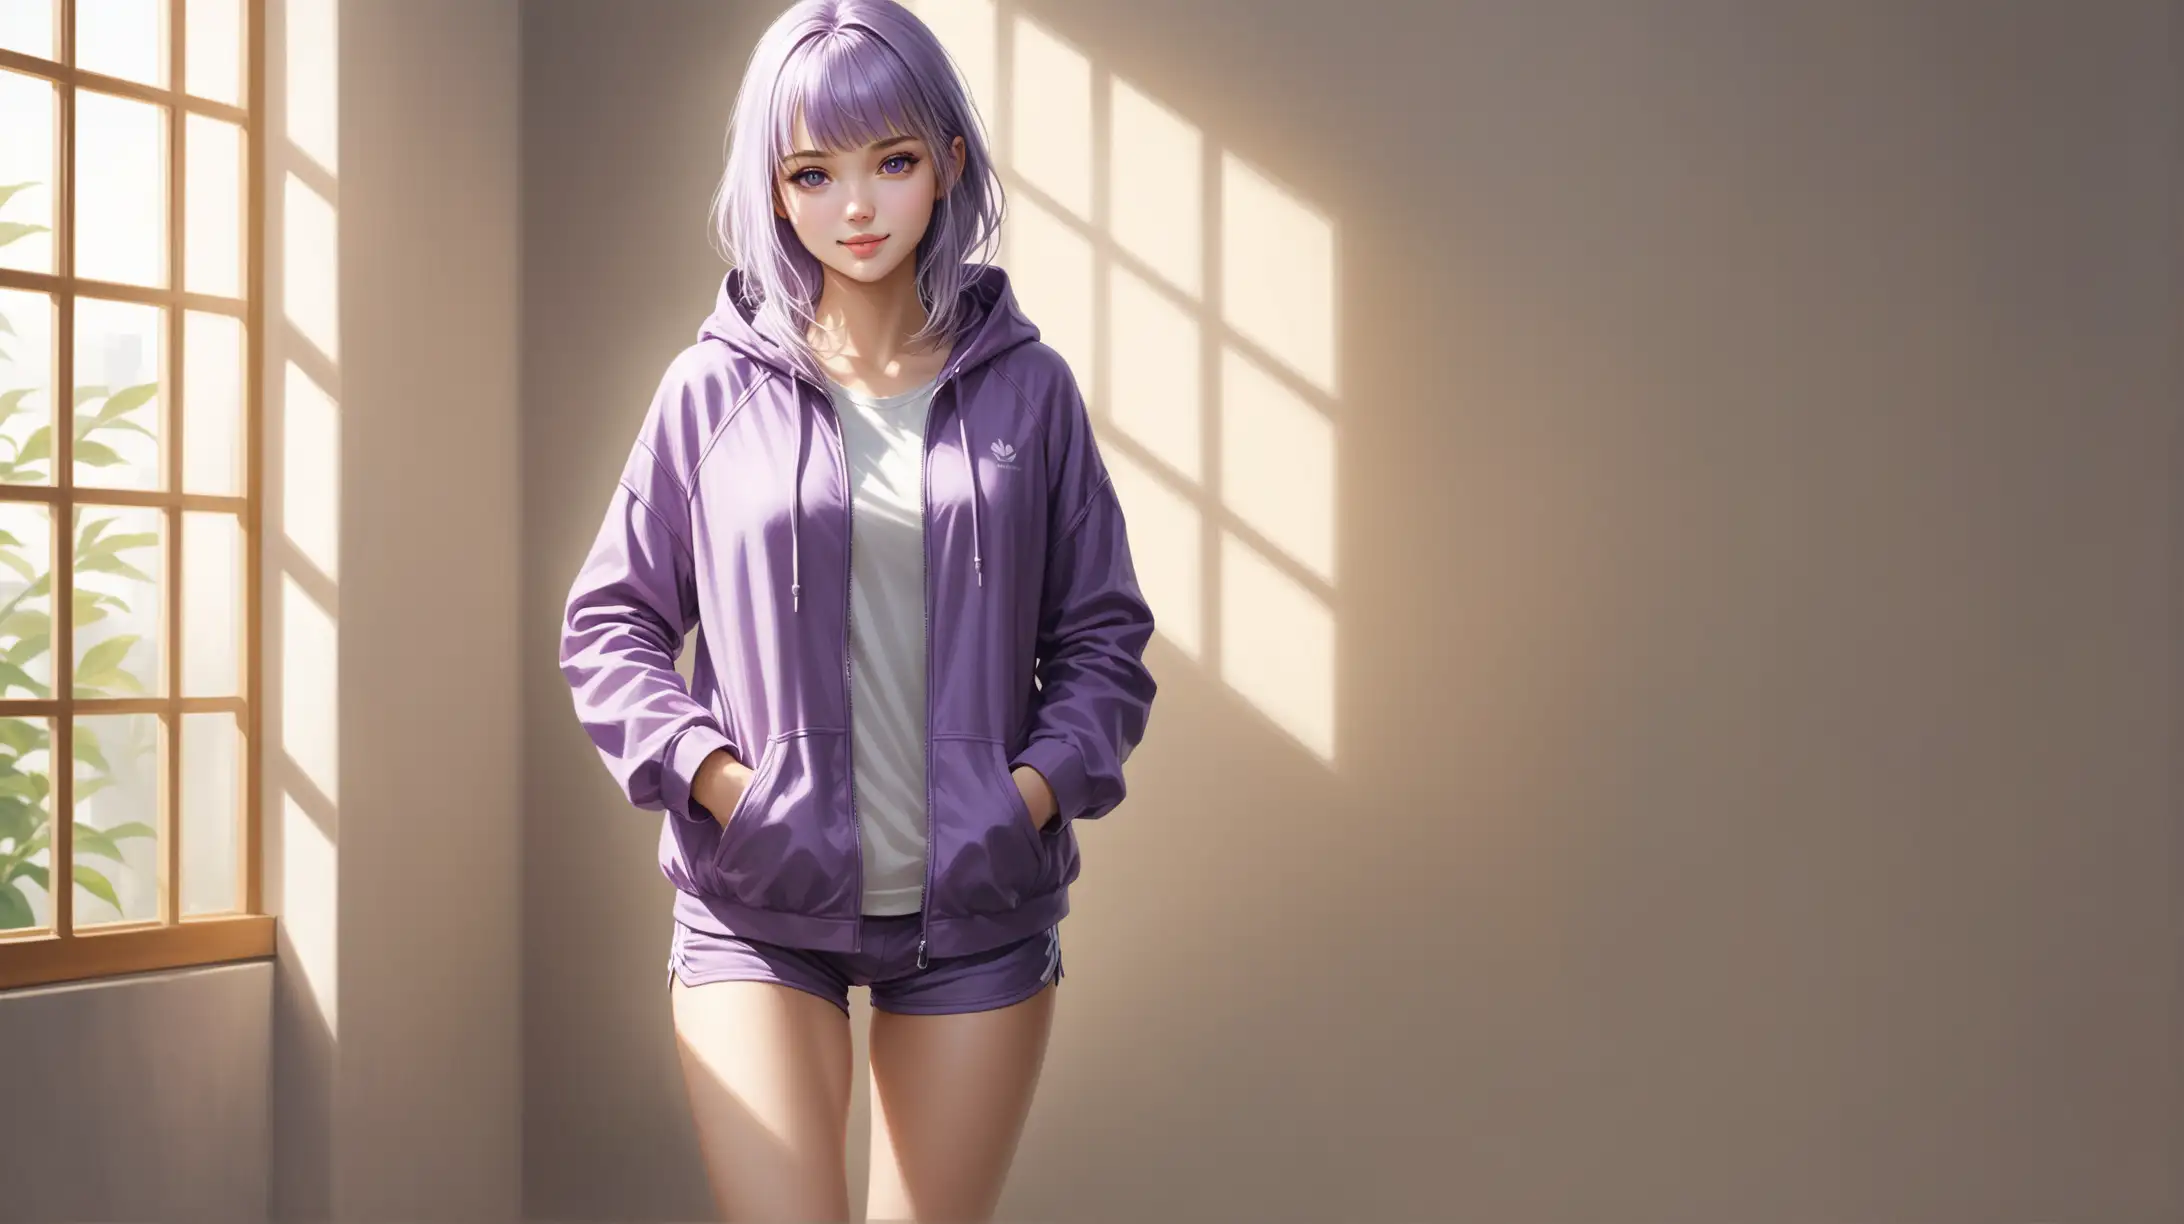 Seductive Woman with Light Purple Hair in Hooded Jacket and Shorts